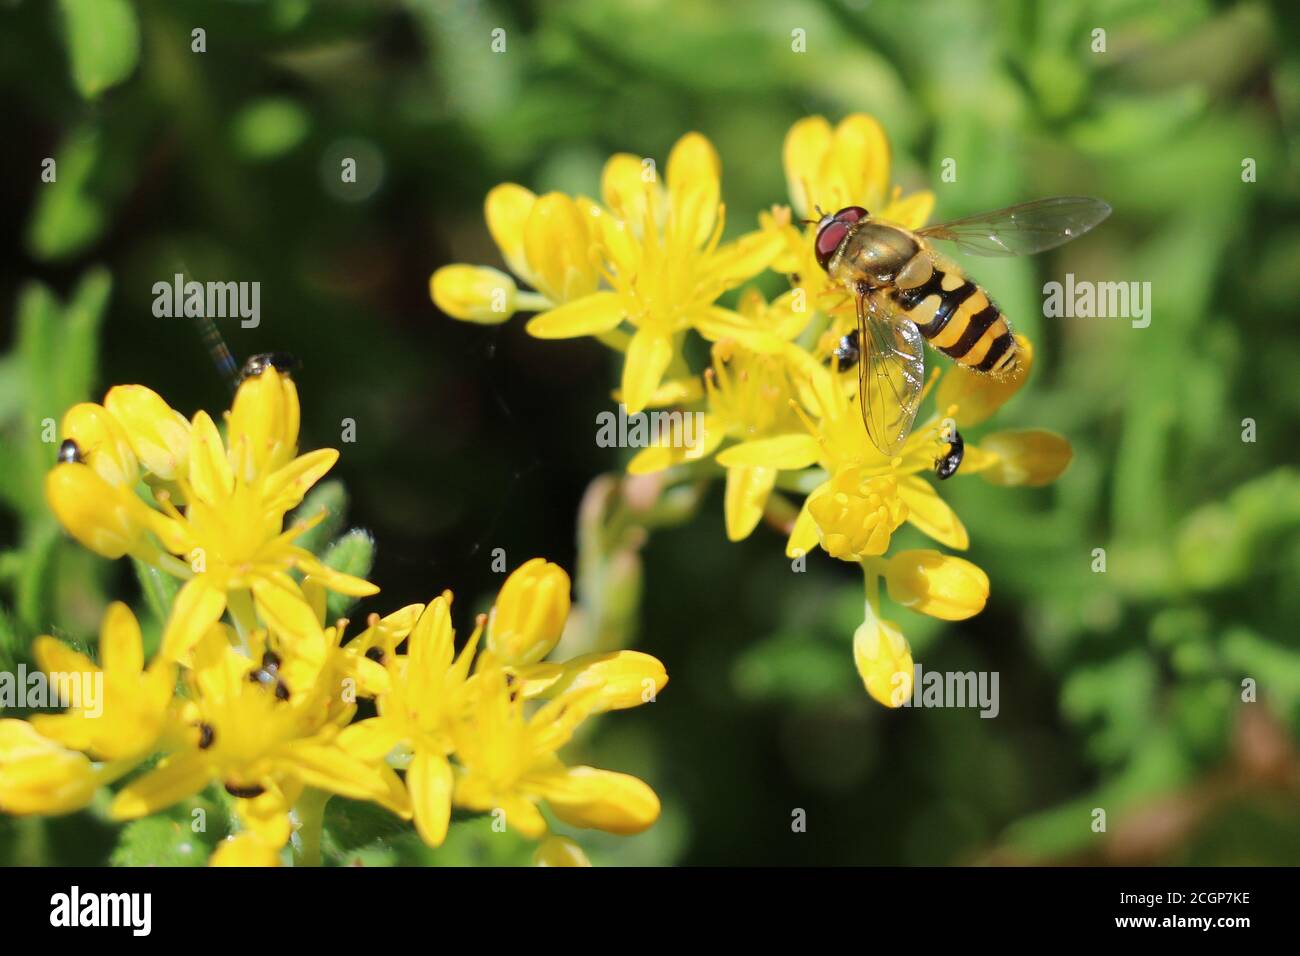 Yellow and black banded male hoverfly, Syrphus sp., on a yellow ragwort flower, Senecio jacobaea, close up, above view, green diffused background Stock Photo